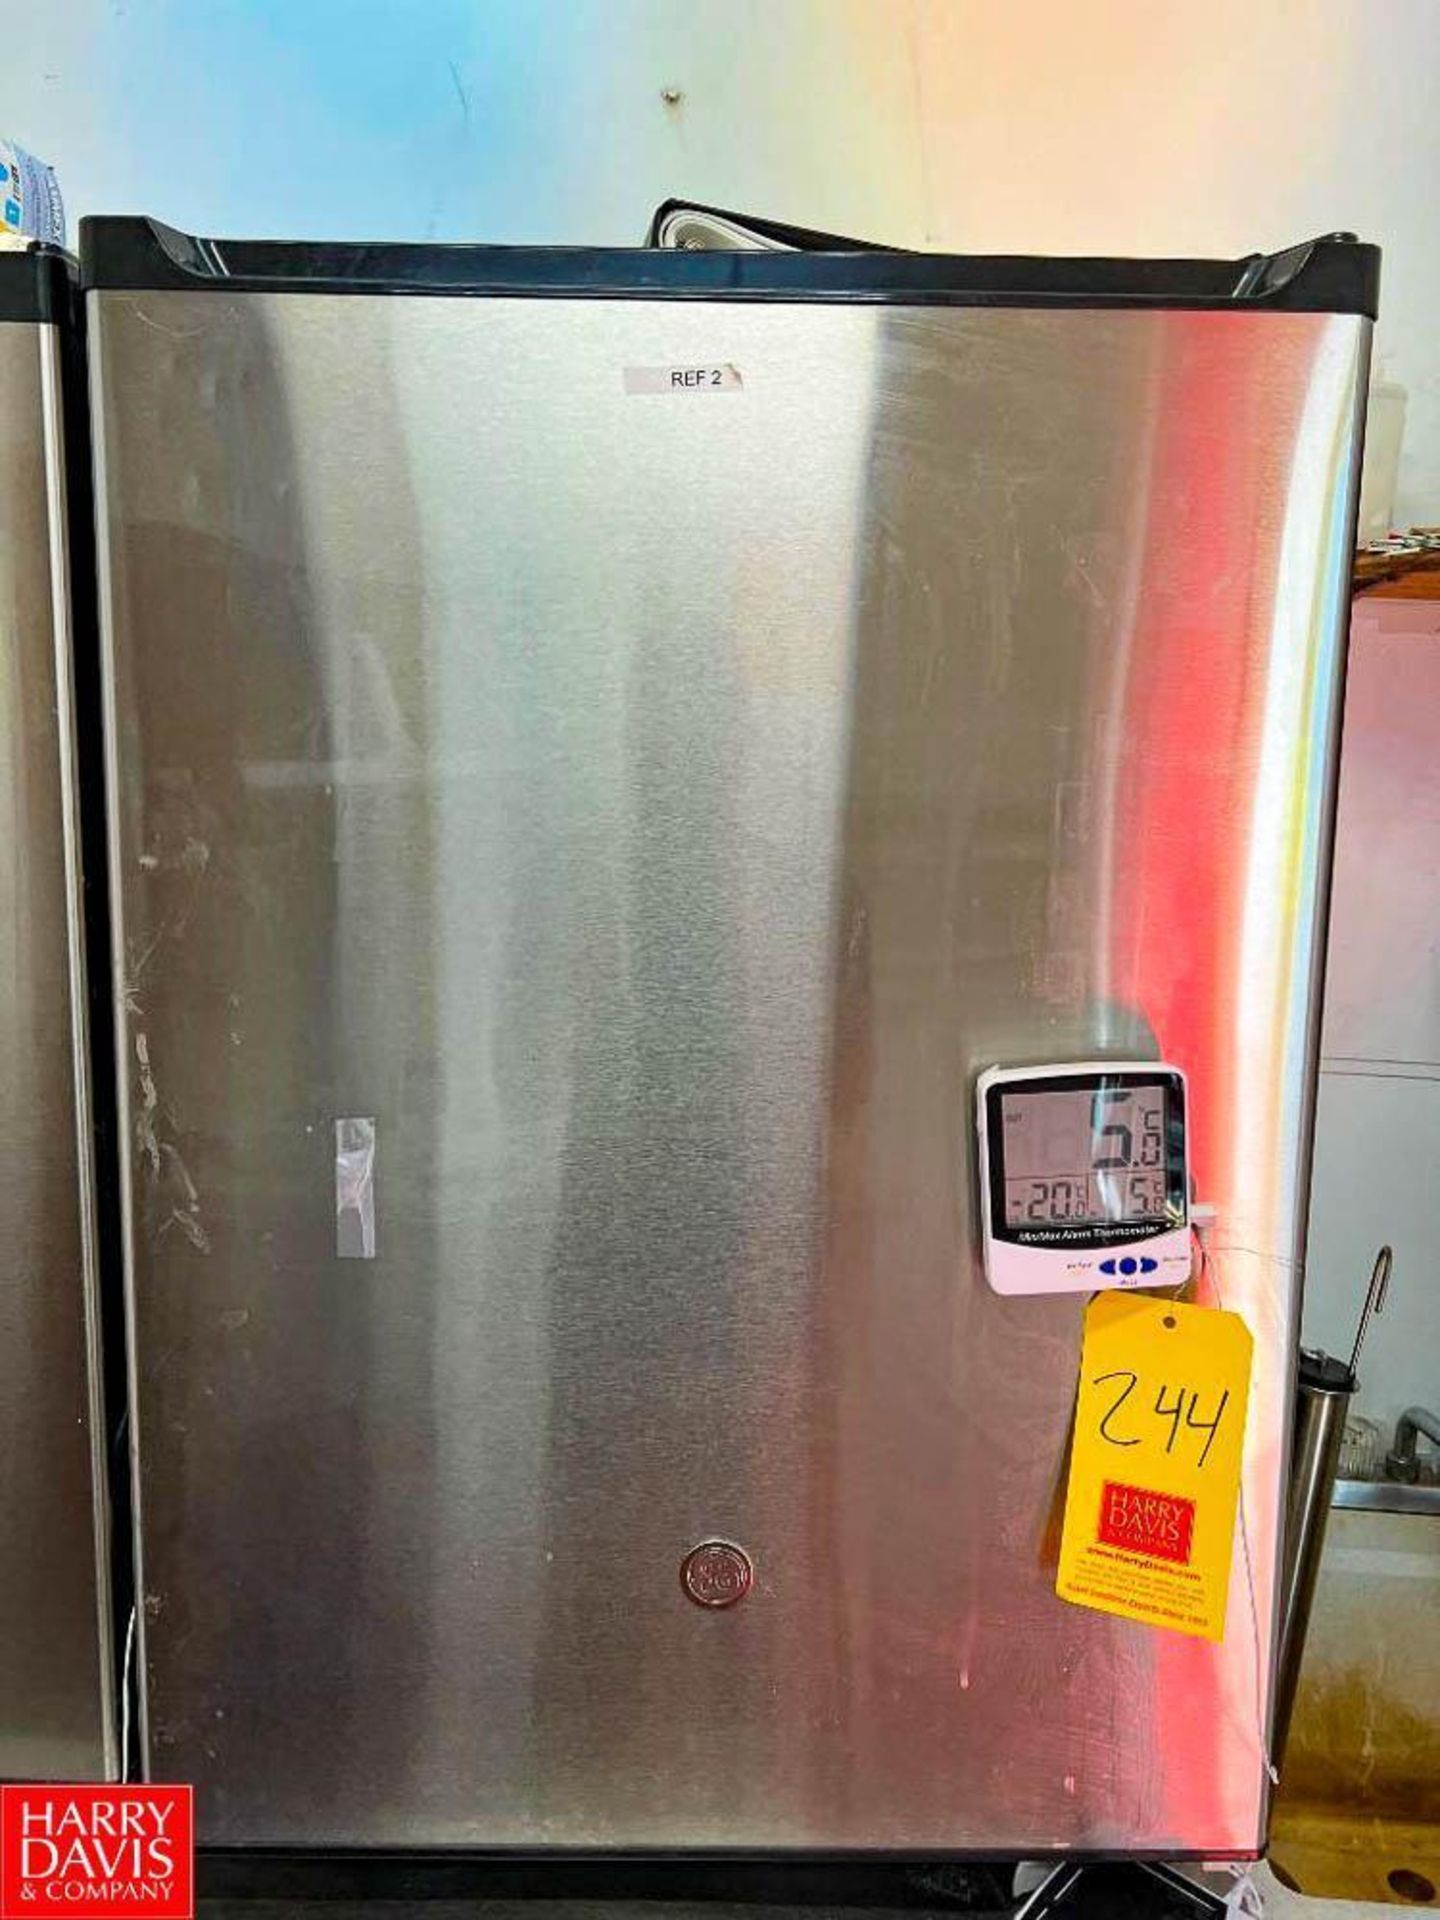 Ge Lab Refrigerator, Model: GCE06GSHBSB with Digital Thermometer - Image 2 of 2